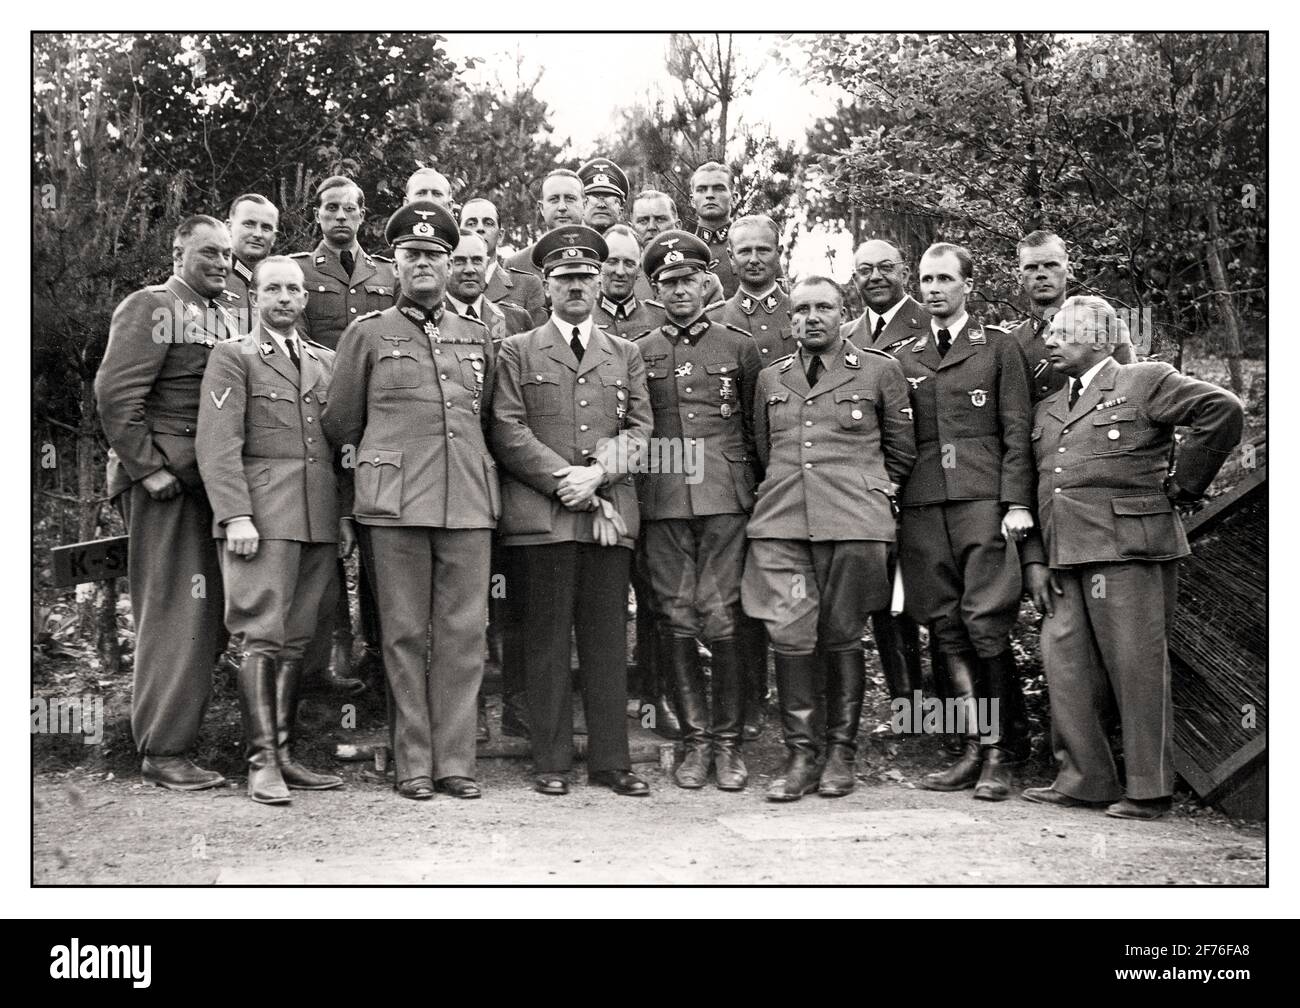 Fascist Nazi Fuhrer leader Hitler with his staff at the headquarters In June 1940, Hitler and his entourage had themselves photographed at the Führer headquarters, it can be assumed that this photo was taken in the 'Wolfsschanze' (built from 1940–1942). As far as known from left to right: SA-Obergruppenführer Wilhelm Brückner, OKH-Adjutant Major Engel, Reich Press Chief Dr. Otto Dietrich, Hitler's attending physician Dr. Karl Brandt, Chief of the OKW Colonel General Wilhelm Keitel, Air Force Adjutant Major General [Karl] Bodenschatz, Adolf Hitler, Wehrmacht adjutant Colonel Rudolf Schmundt, SS Stock Photo